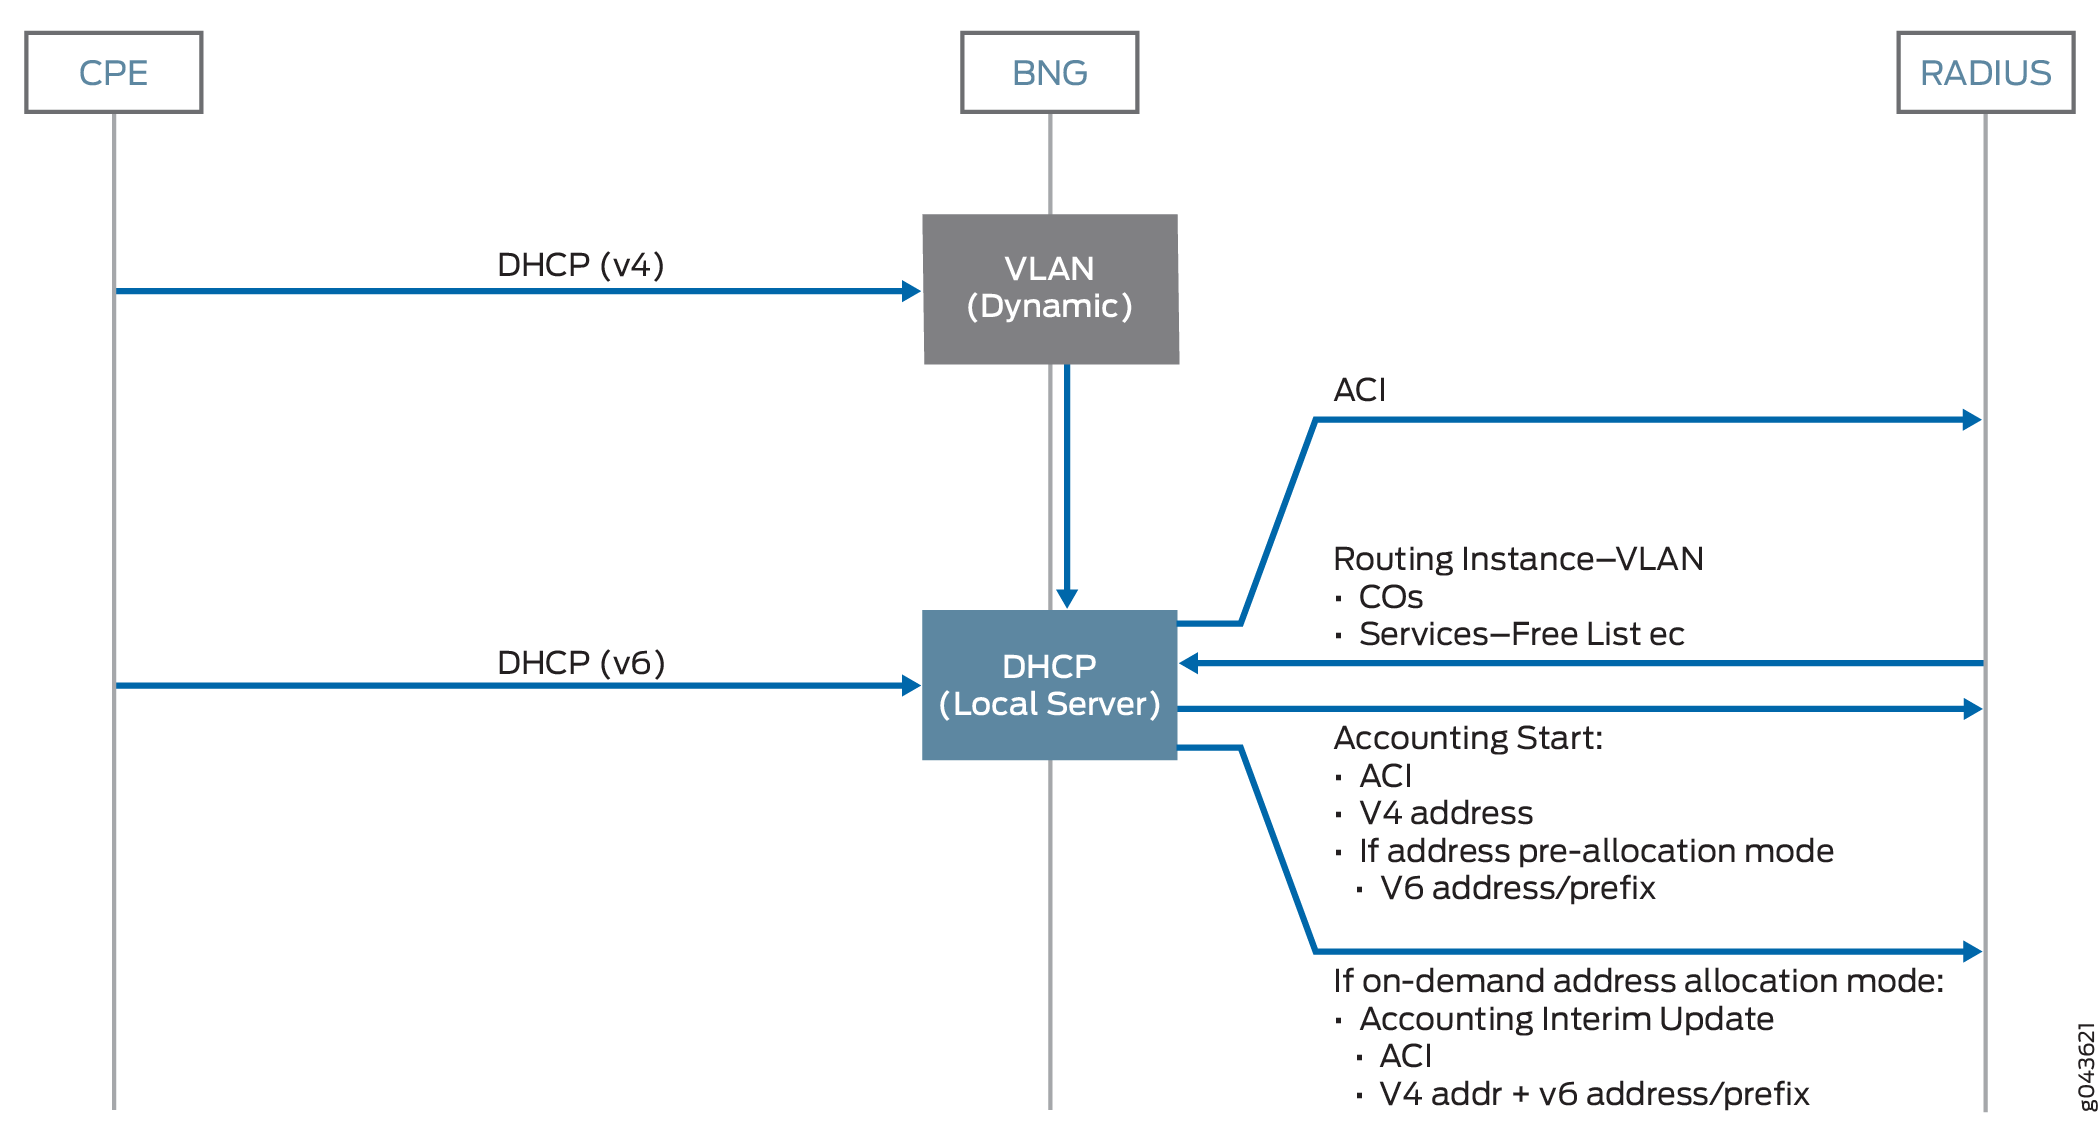 DHCP
Dual Stack Single-Session Subscriber Deployment Model